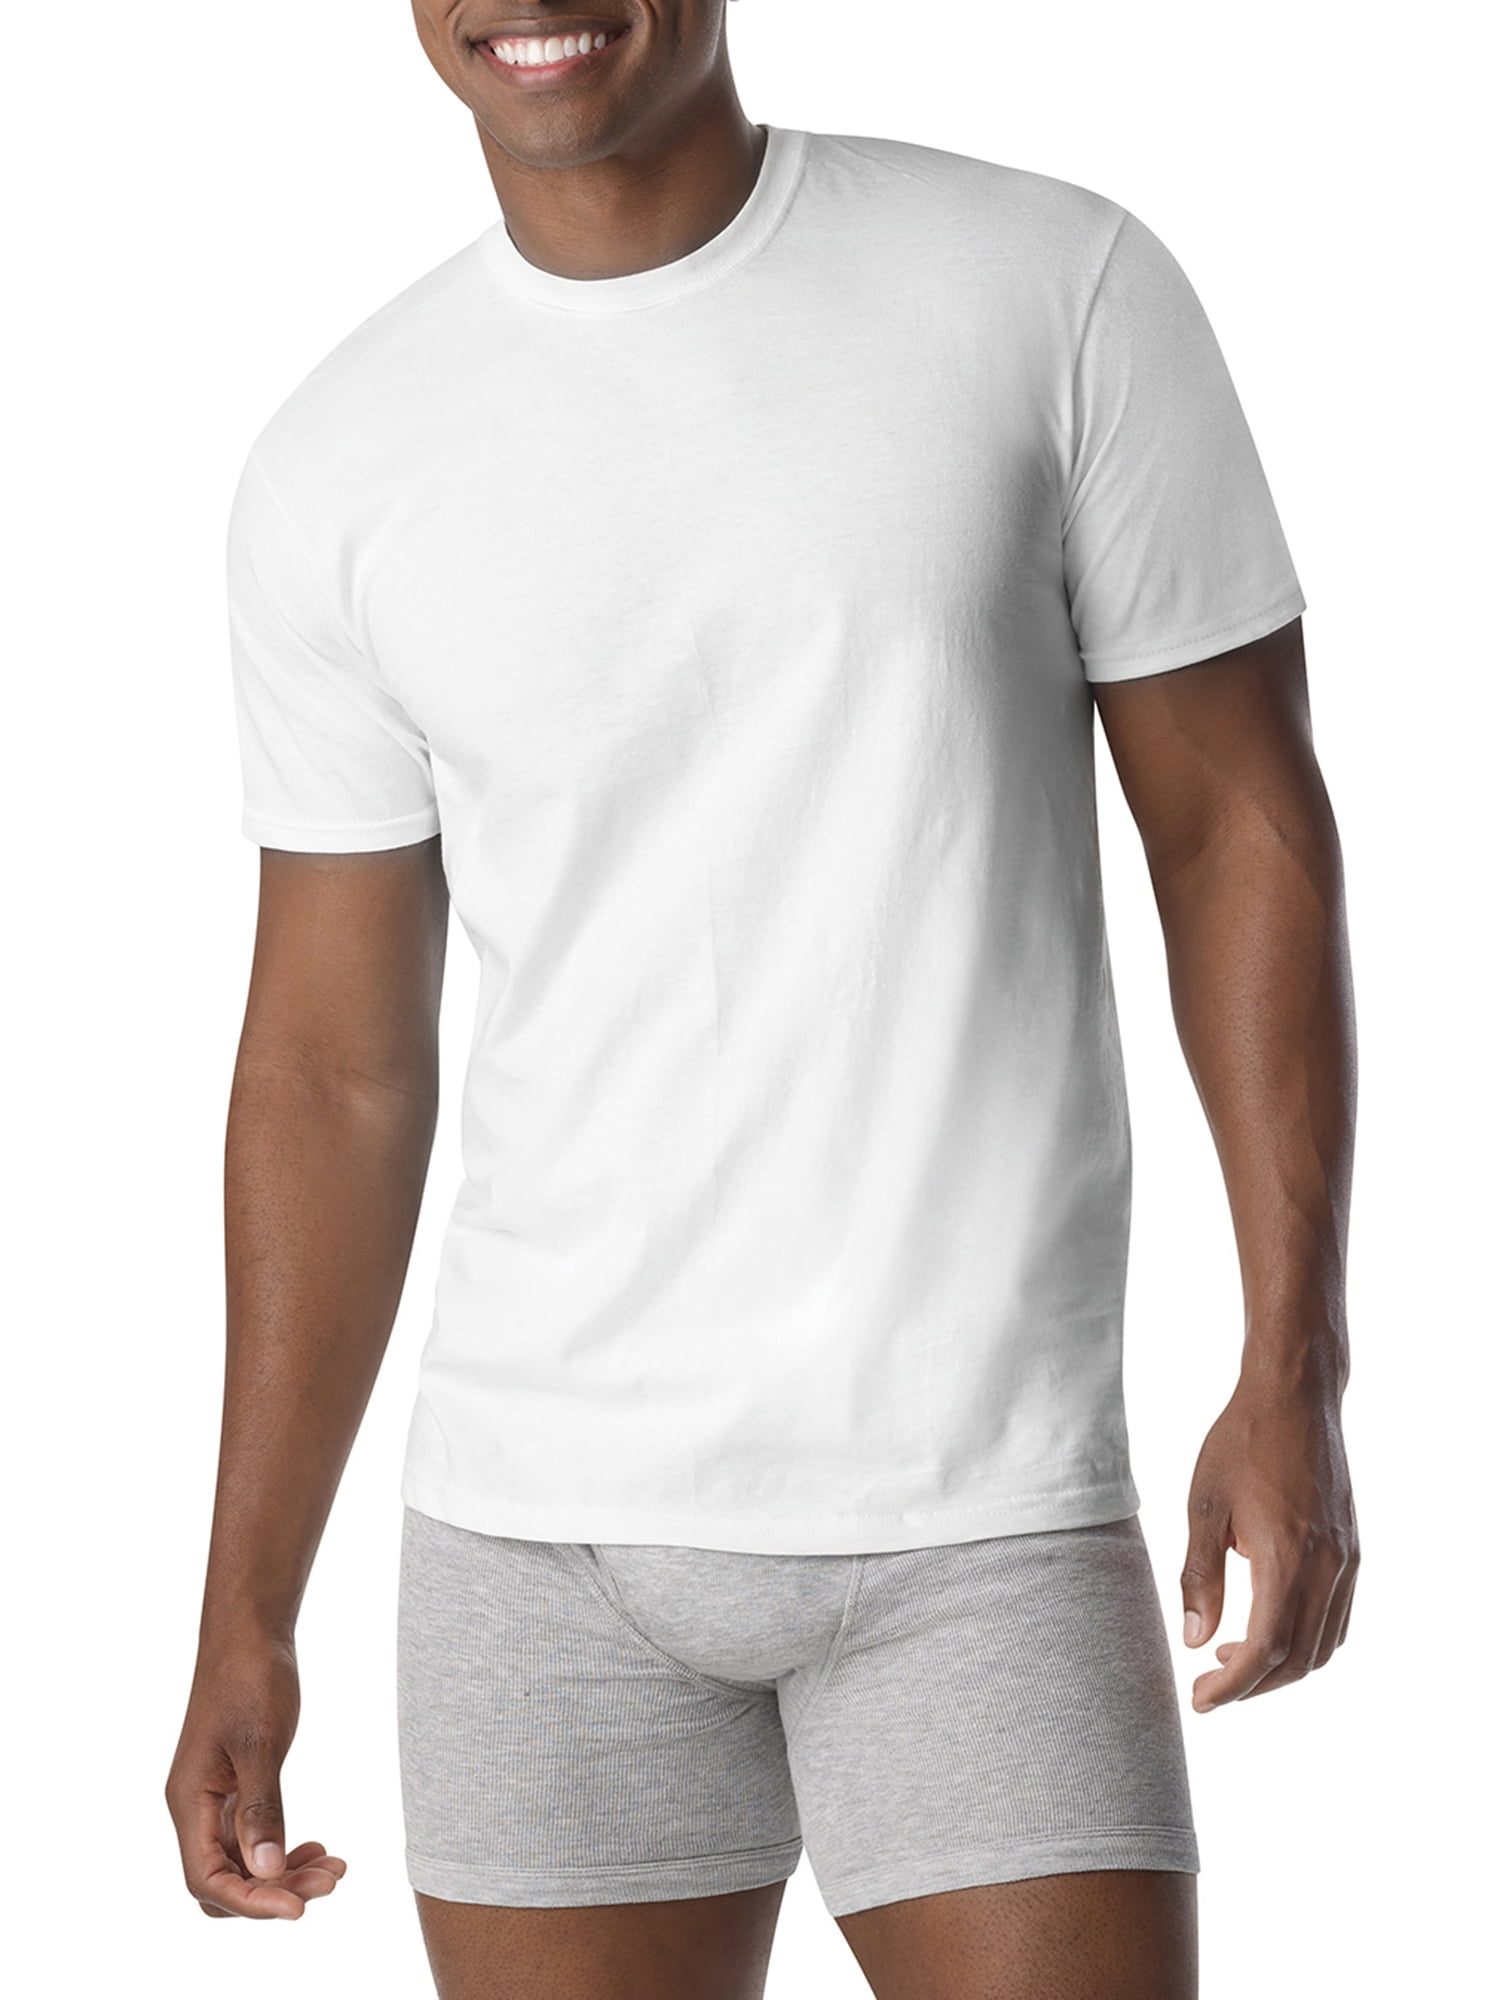 XL choose your size 4 pack hanes mens t shirt white sizes S